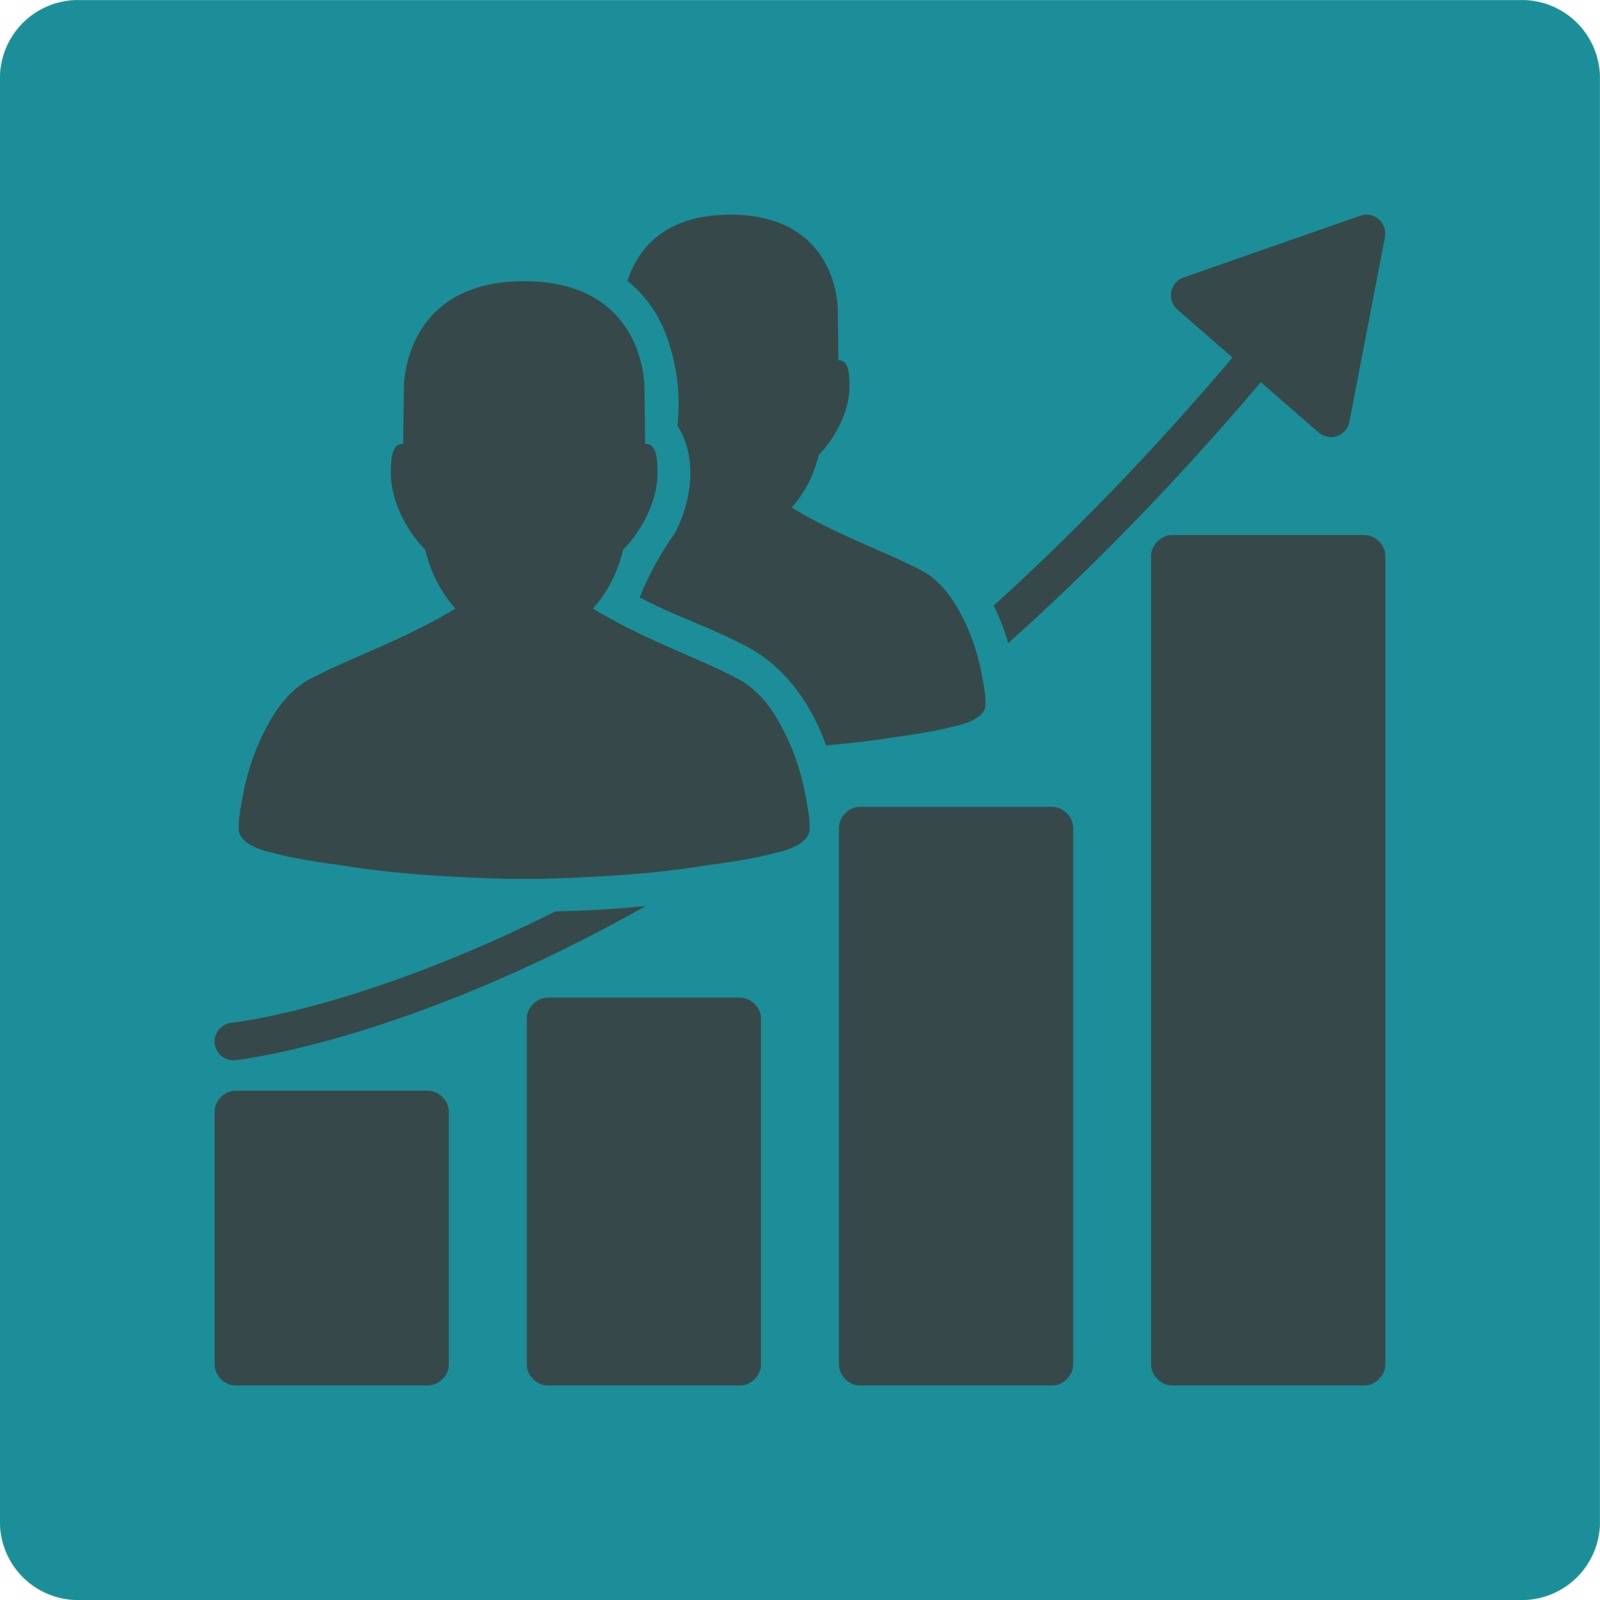 Audience Growth Icon by ahasoft